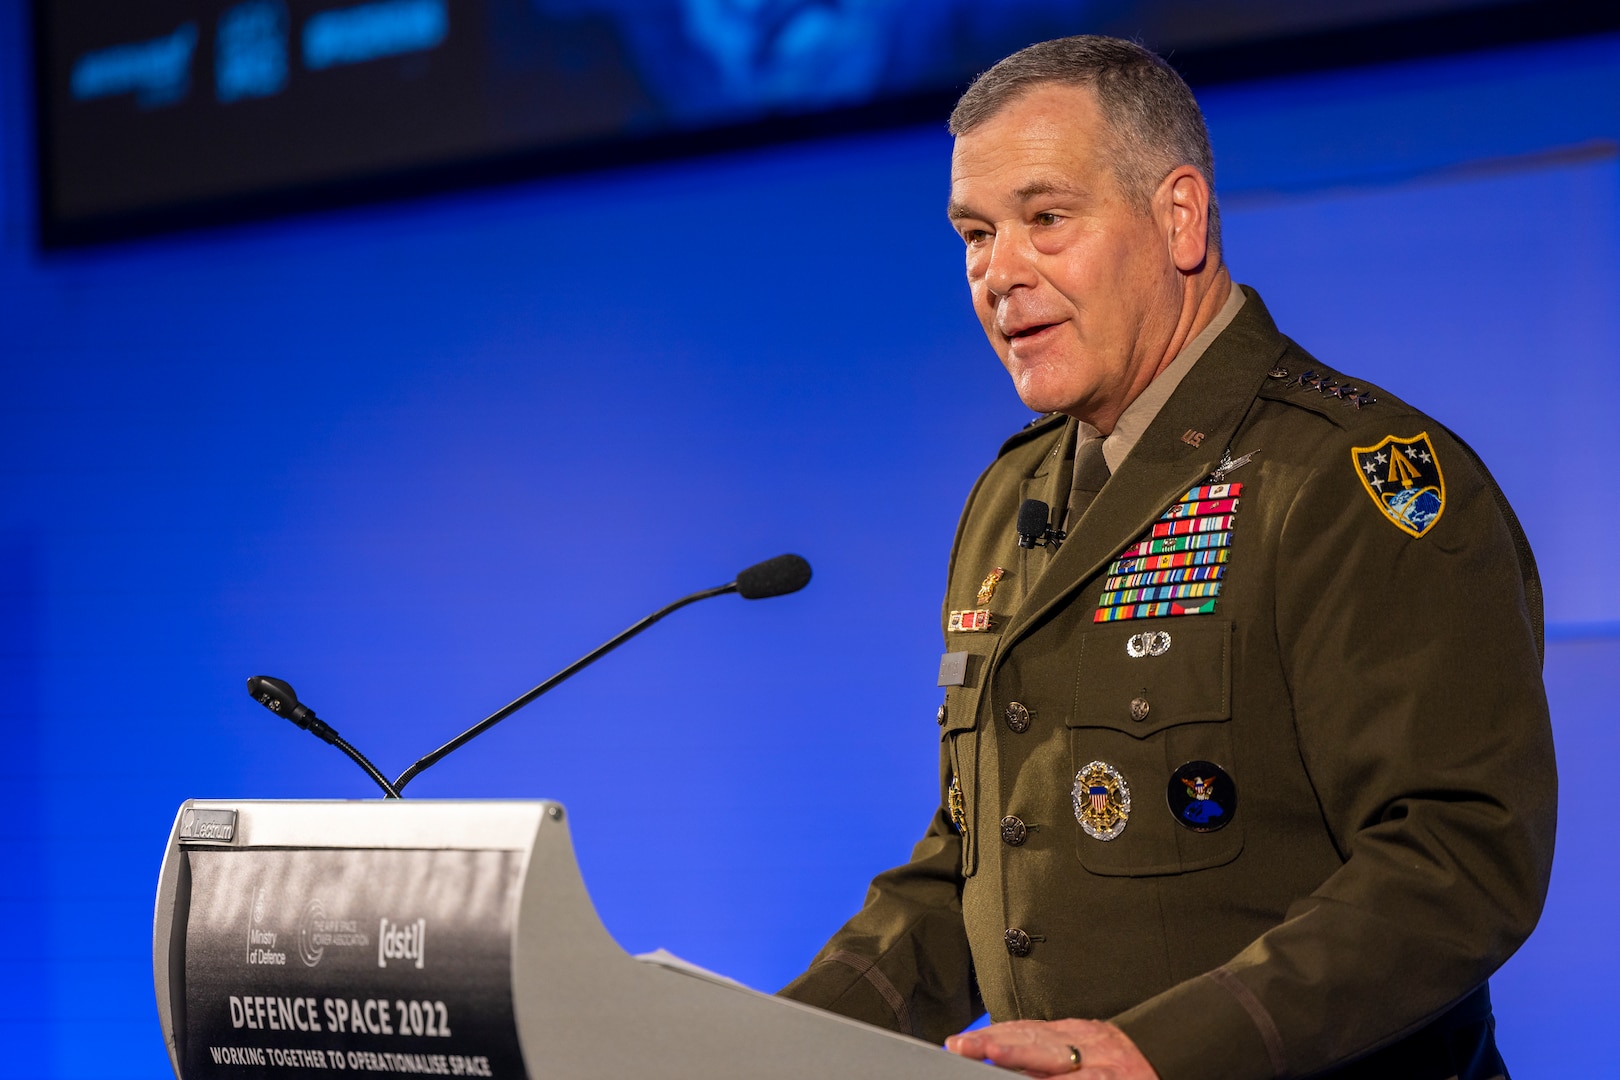 U.S. Space Command Commander travels to the United Kingdom to strengthen space cooperation